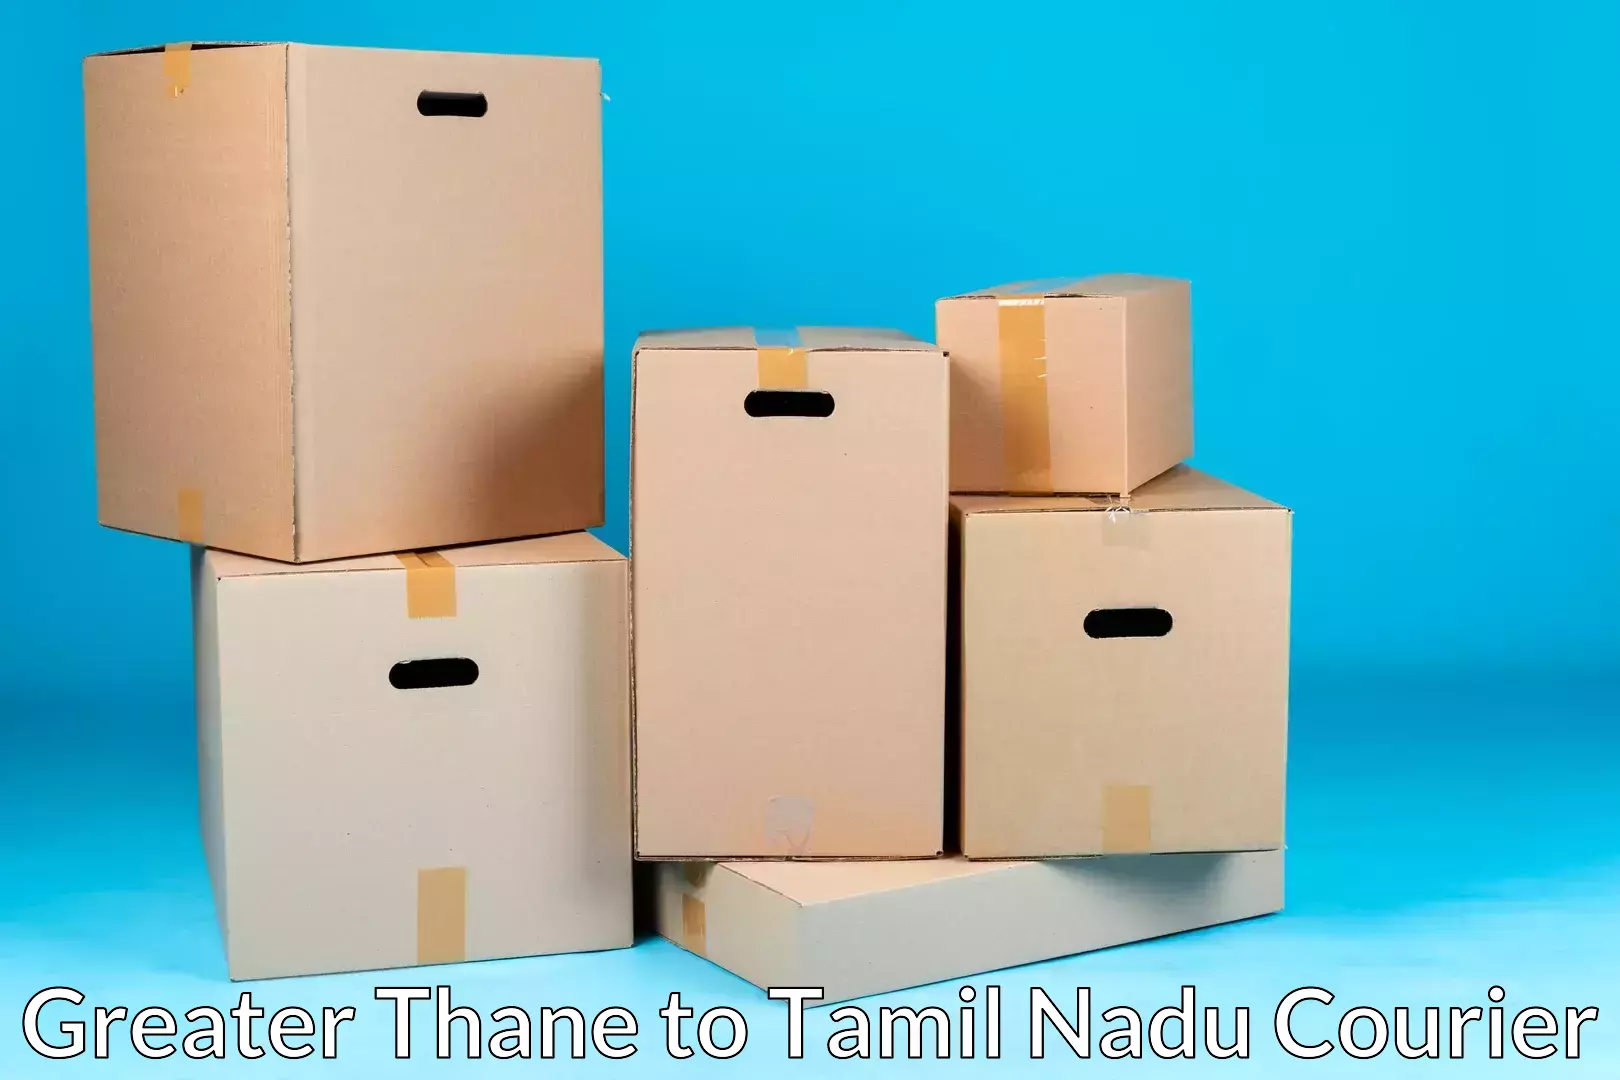 Hassle-free relocation Greater Thane to Manapparai